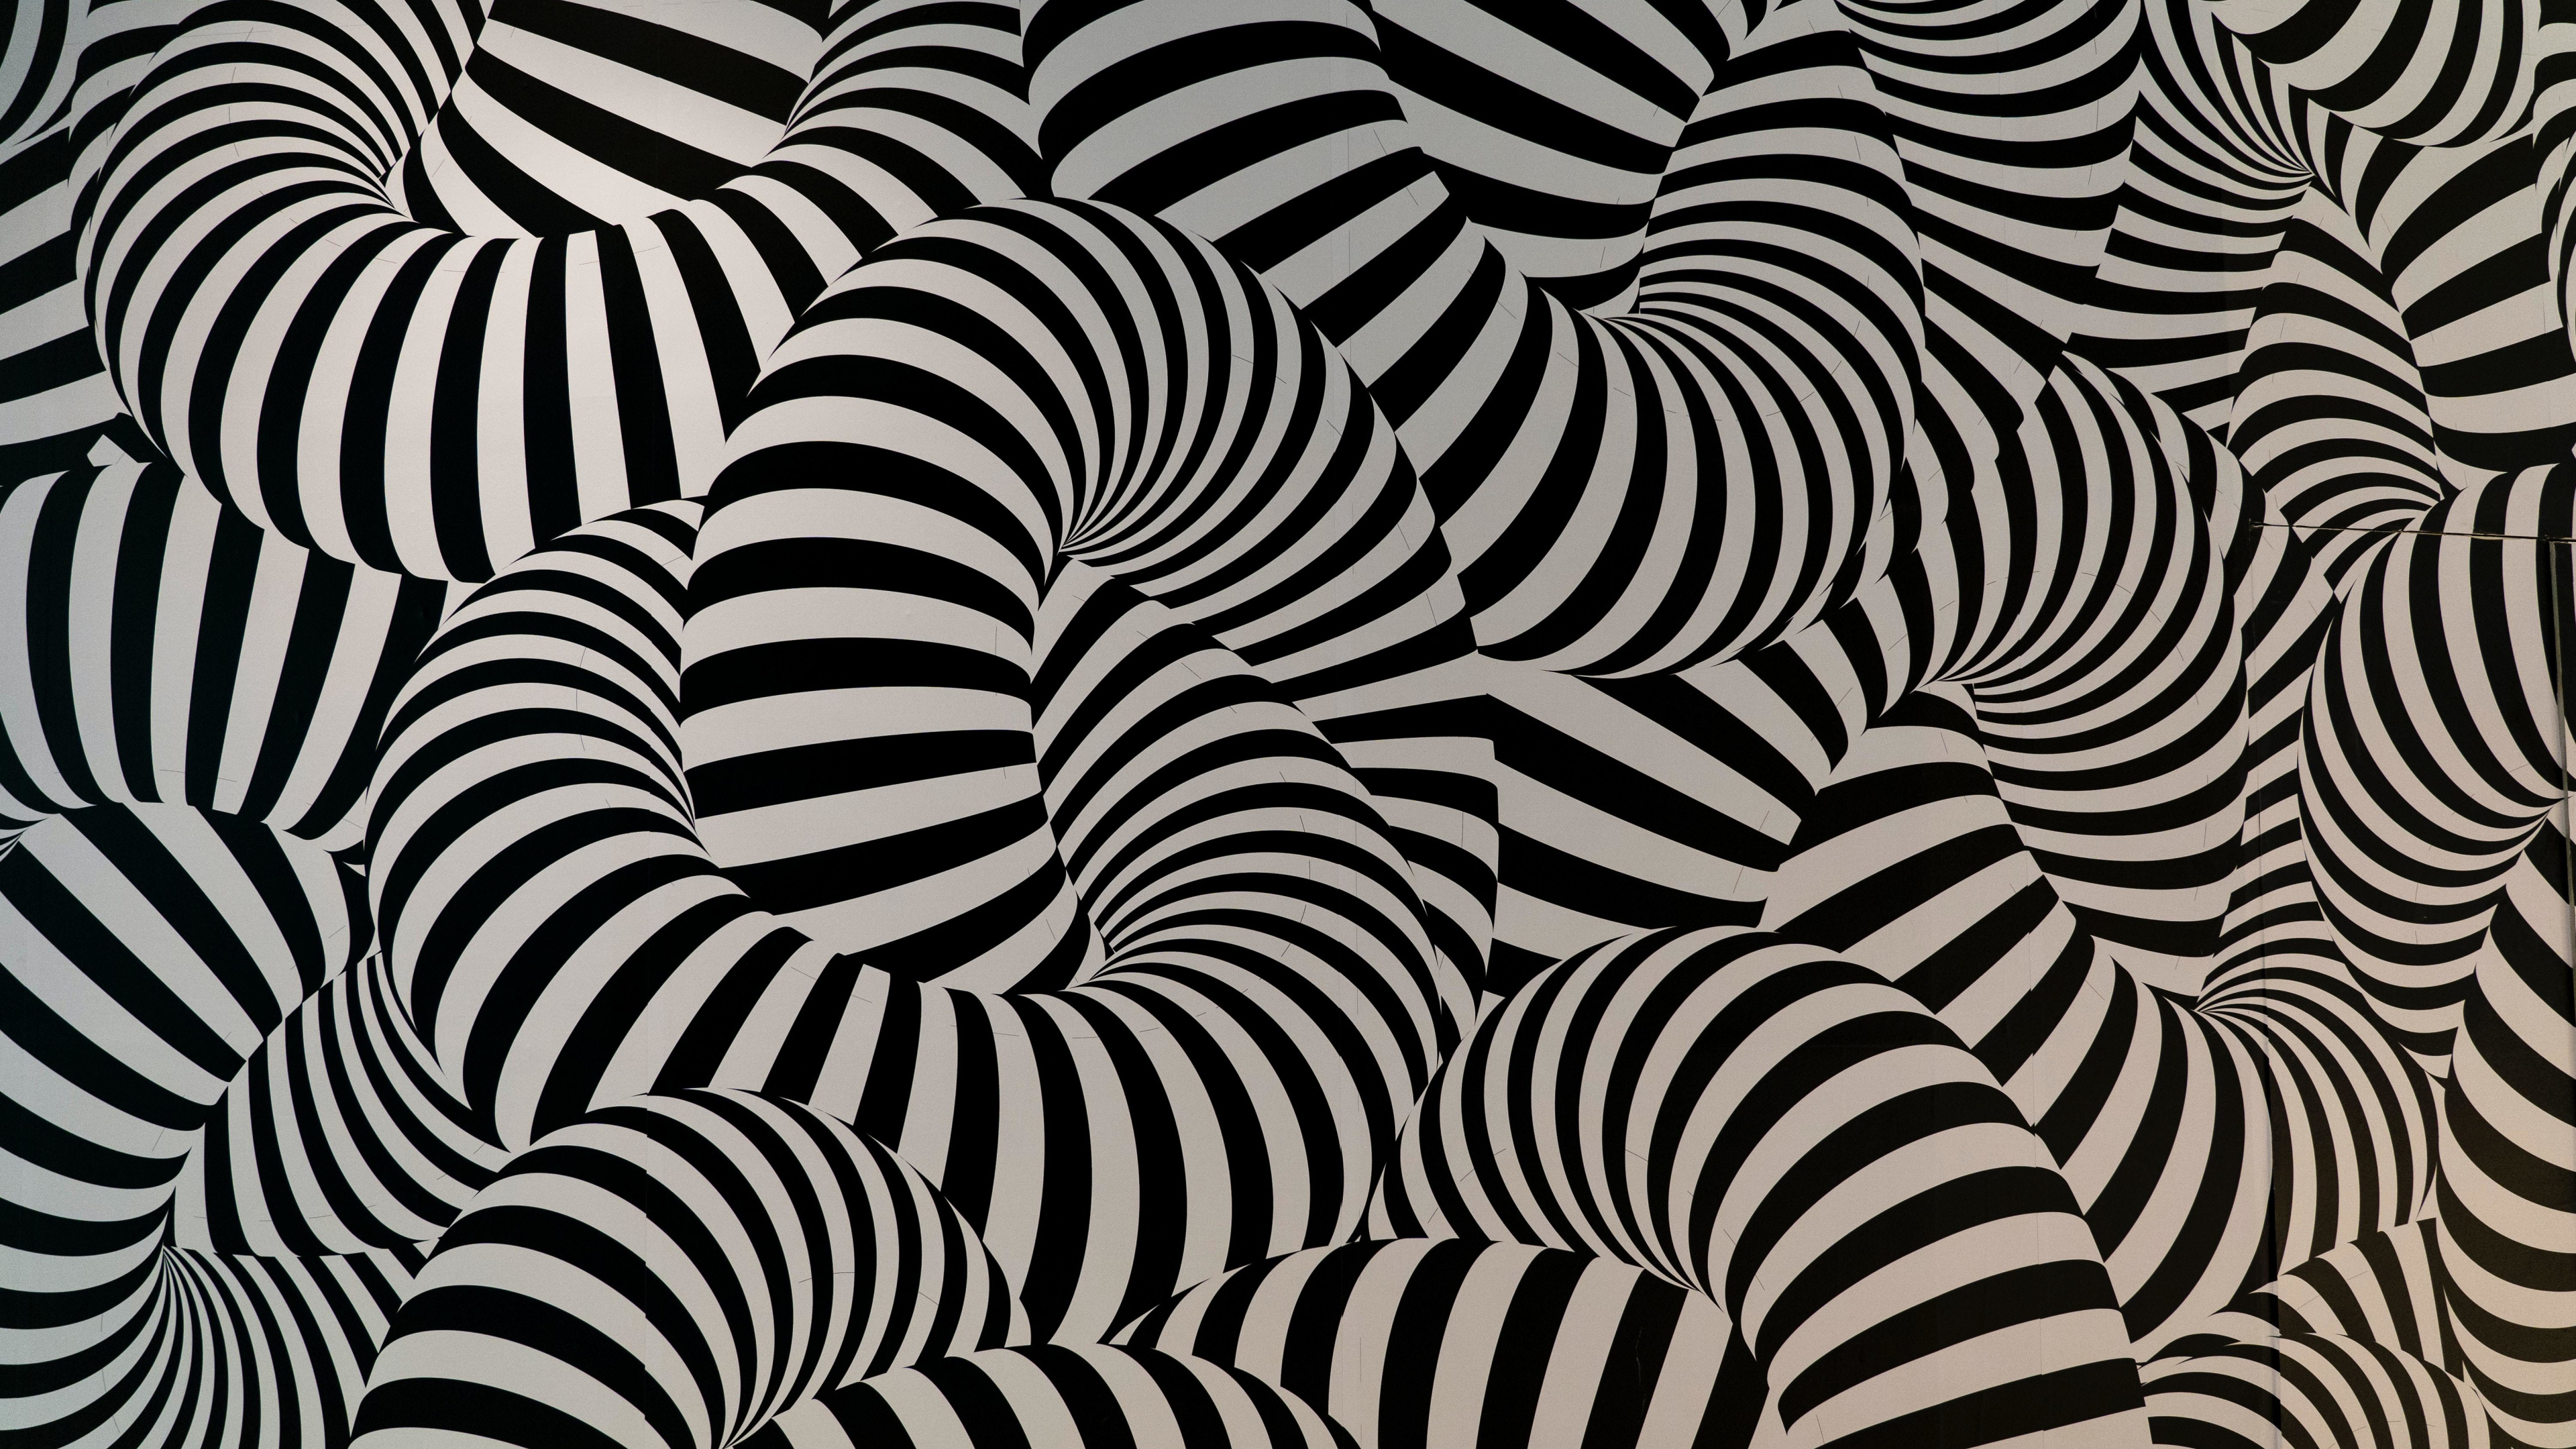 Illusion stripes, Abstraction art, Twisted patterns, Visual hallucinations, 3840x2160 4K Desktop